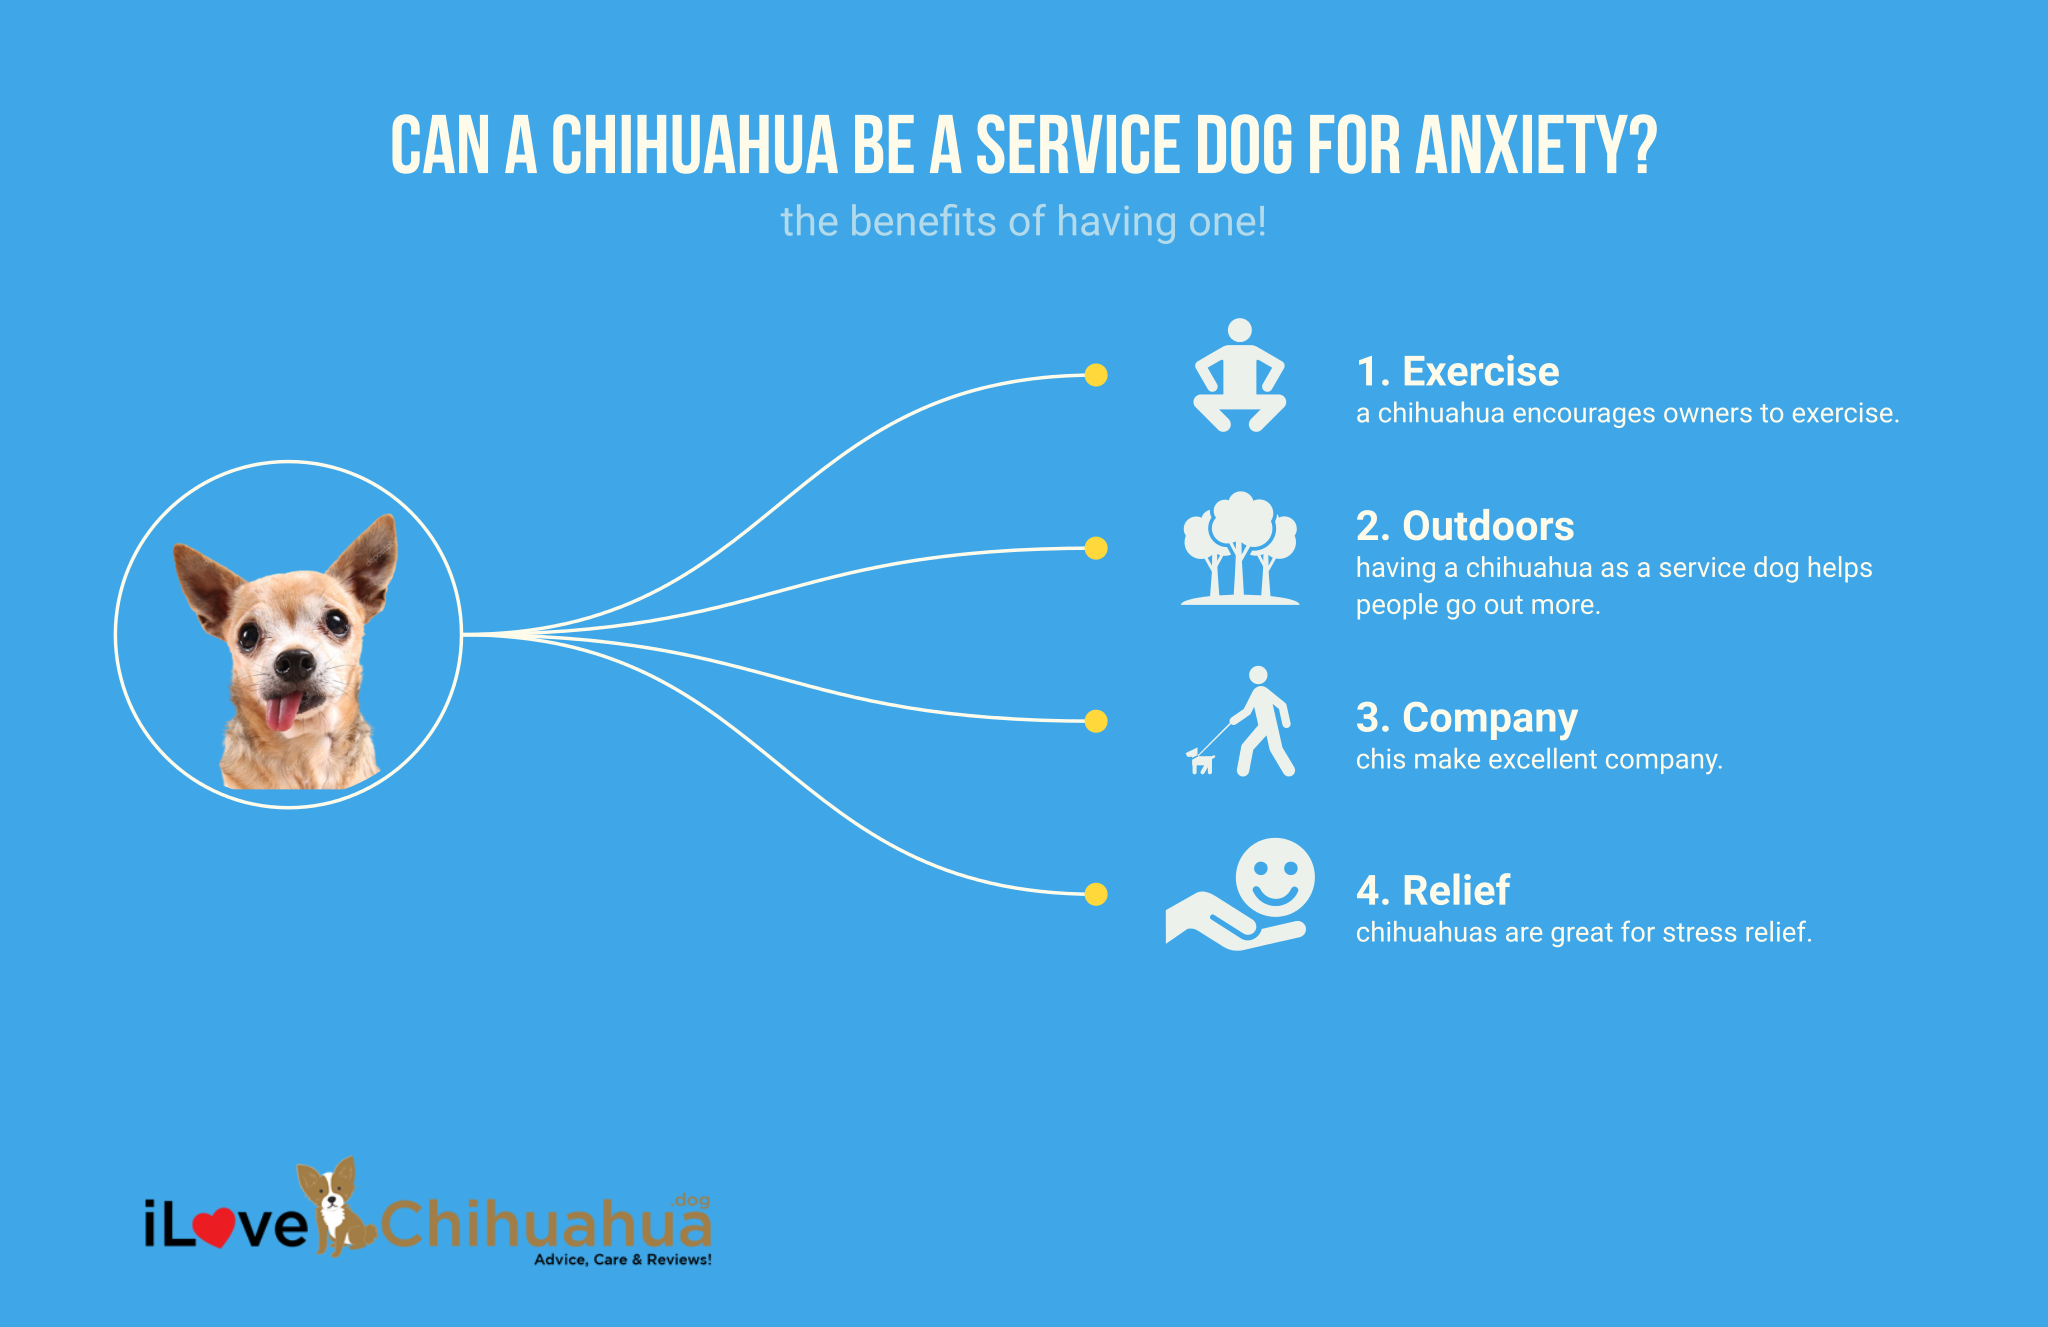 can a chihuahua be a service dog for anxiety (infographic)